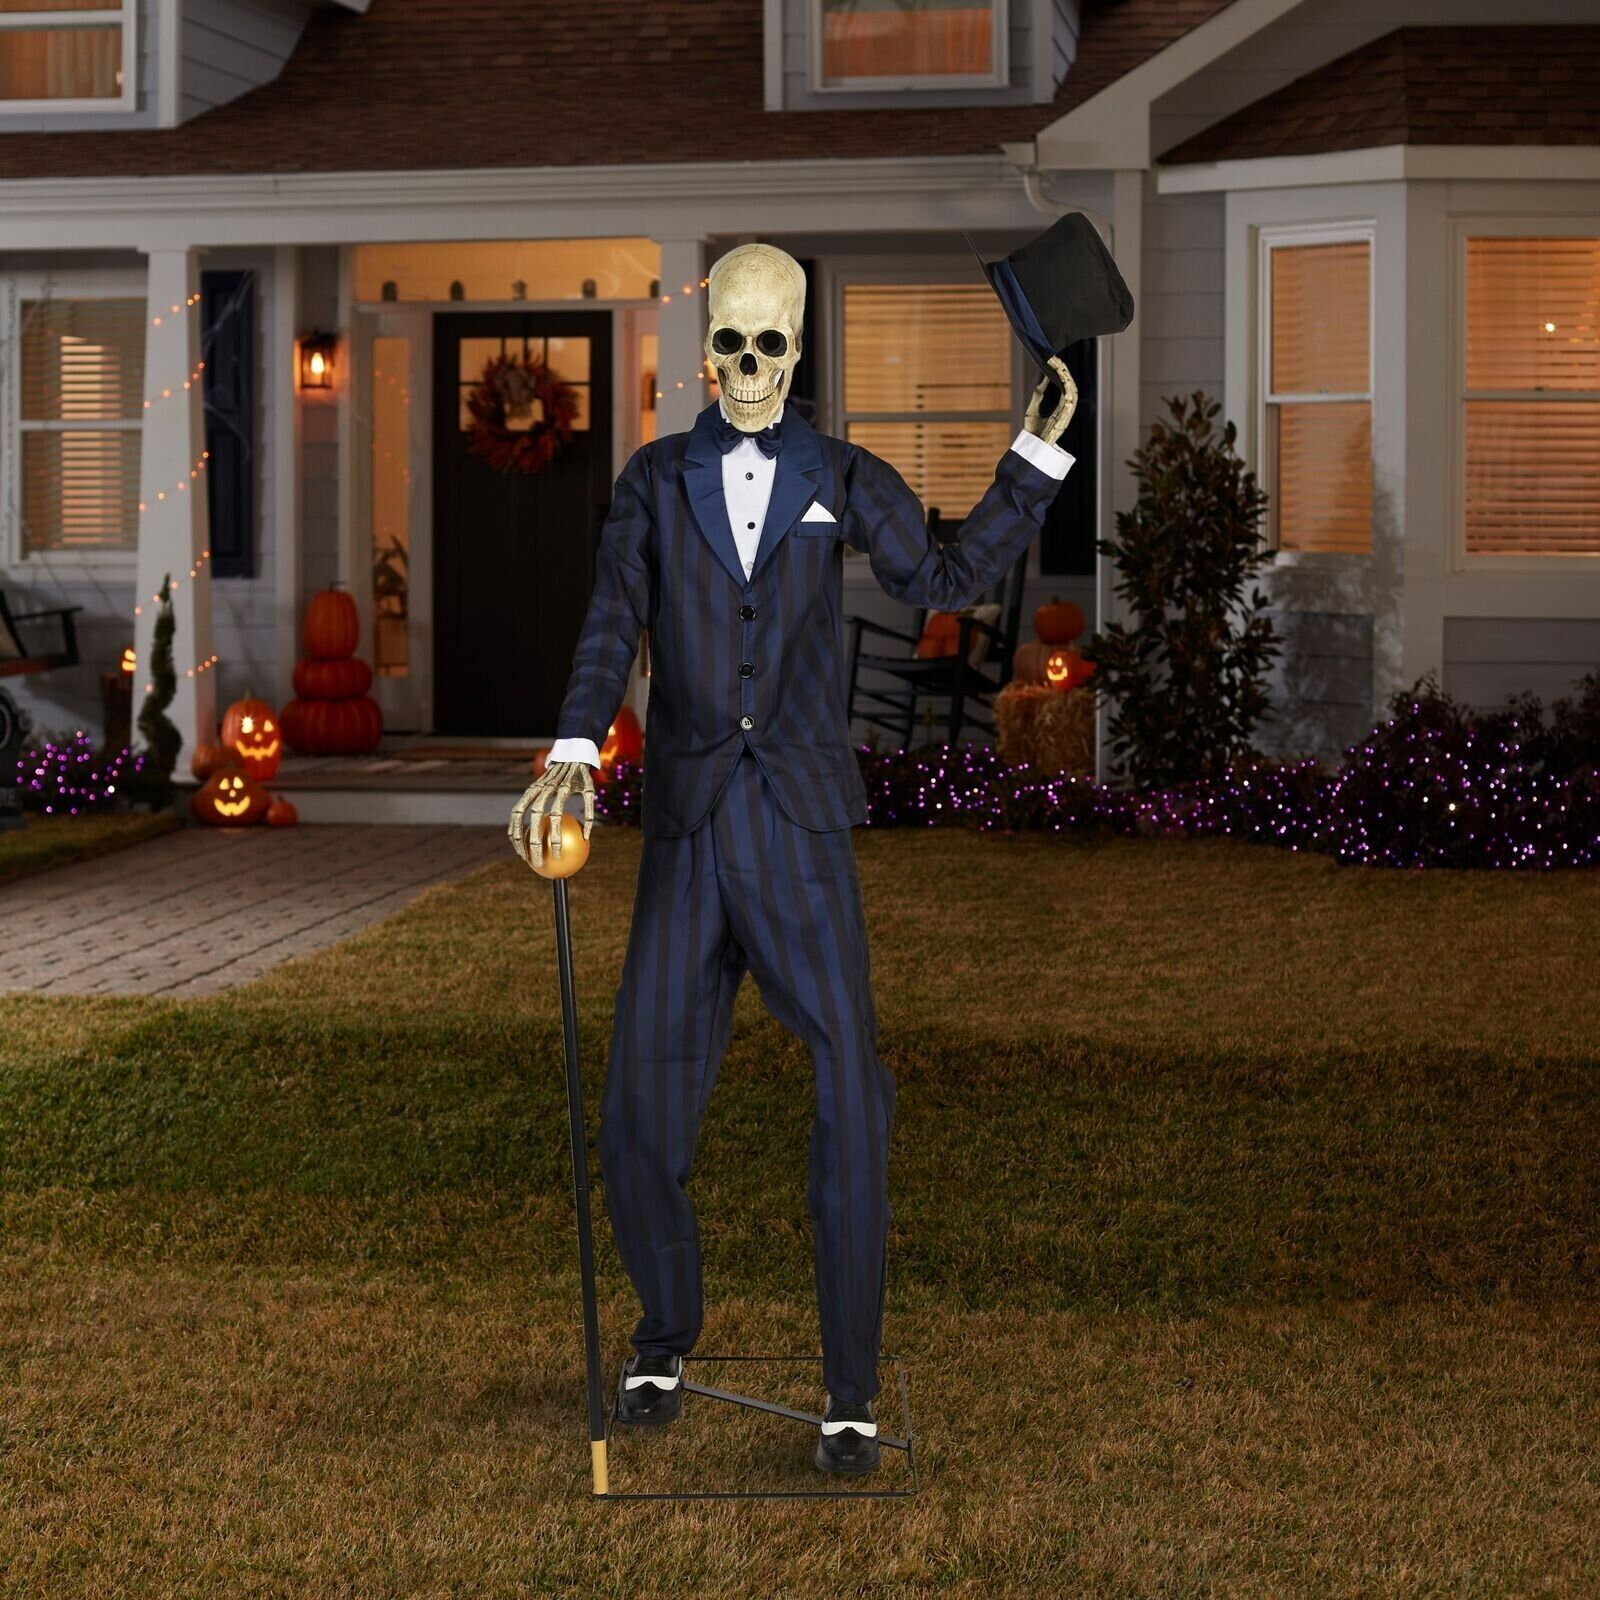 🎃 Brand New Spirit Halloween Dapper Skeleton Animatronic - Sold Out in Stores